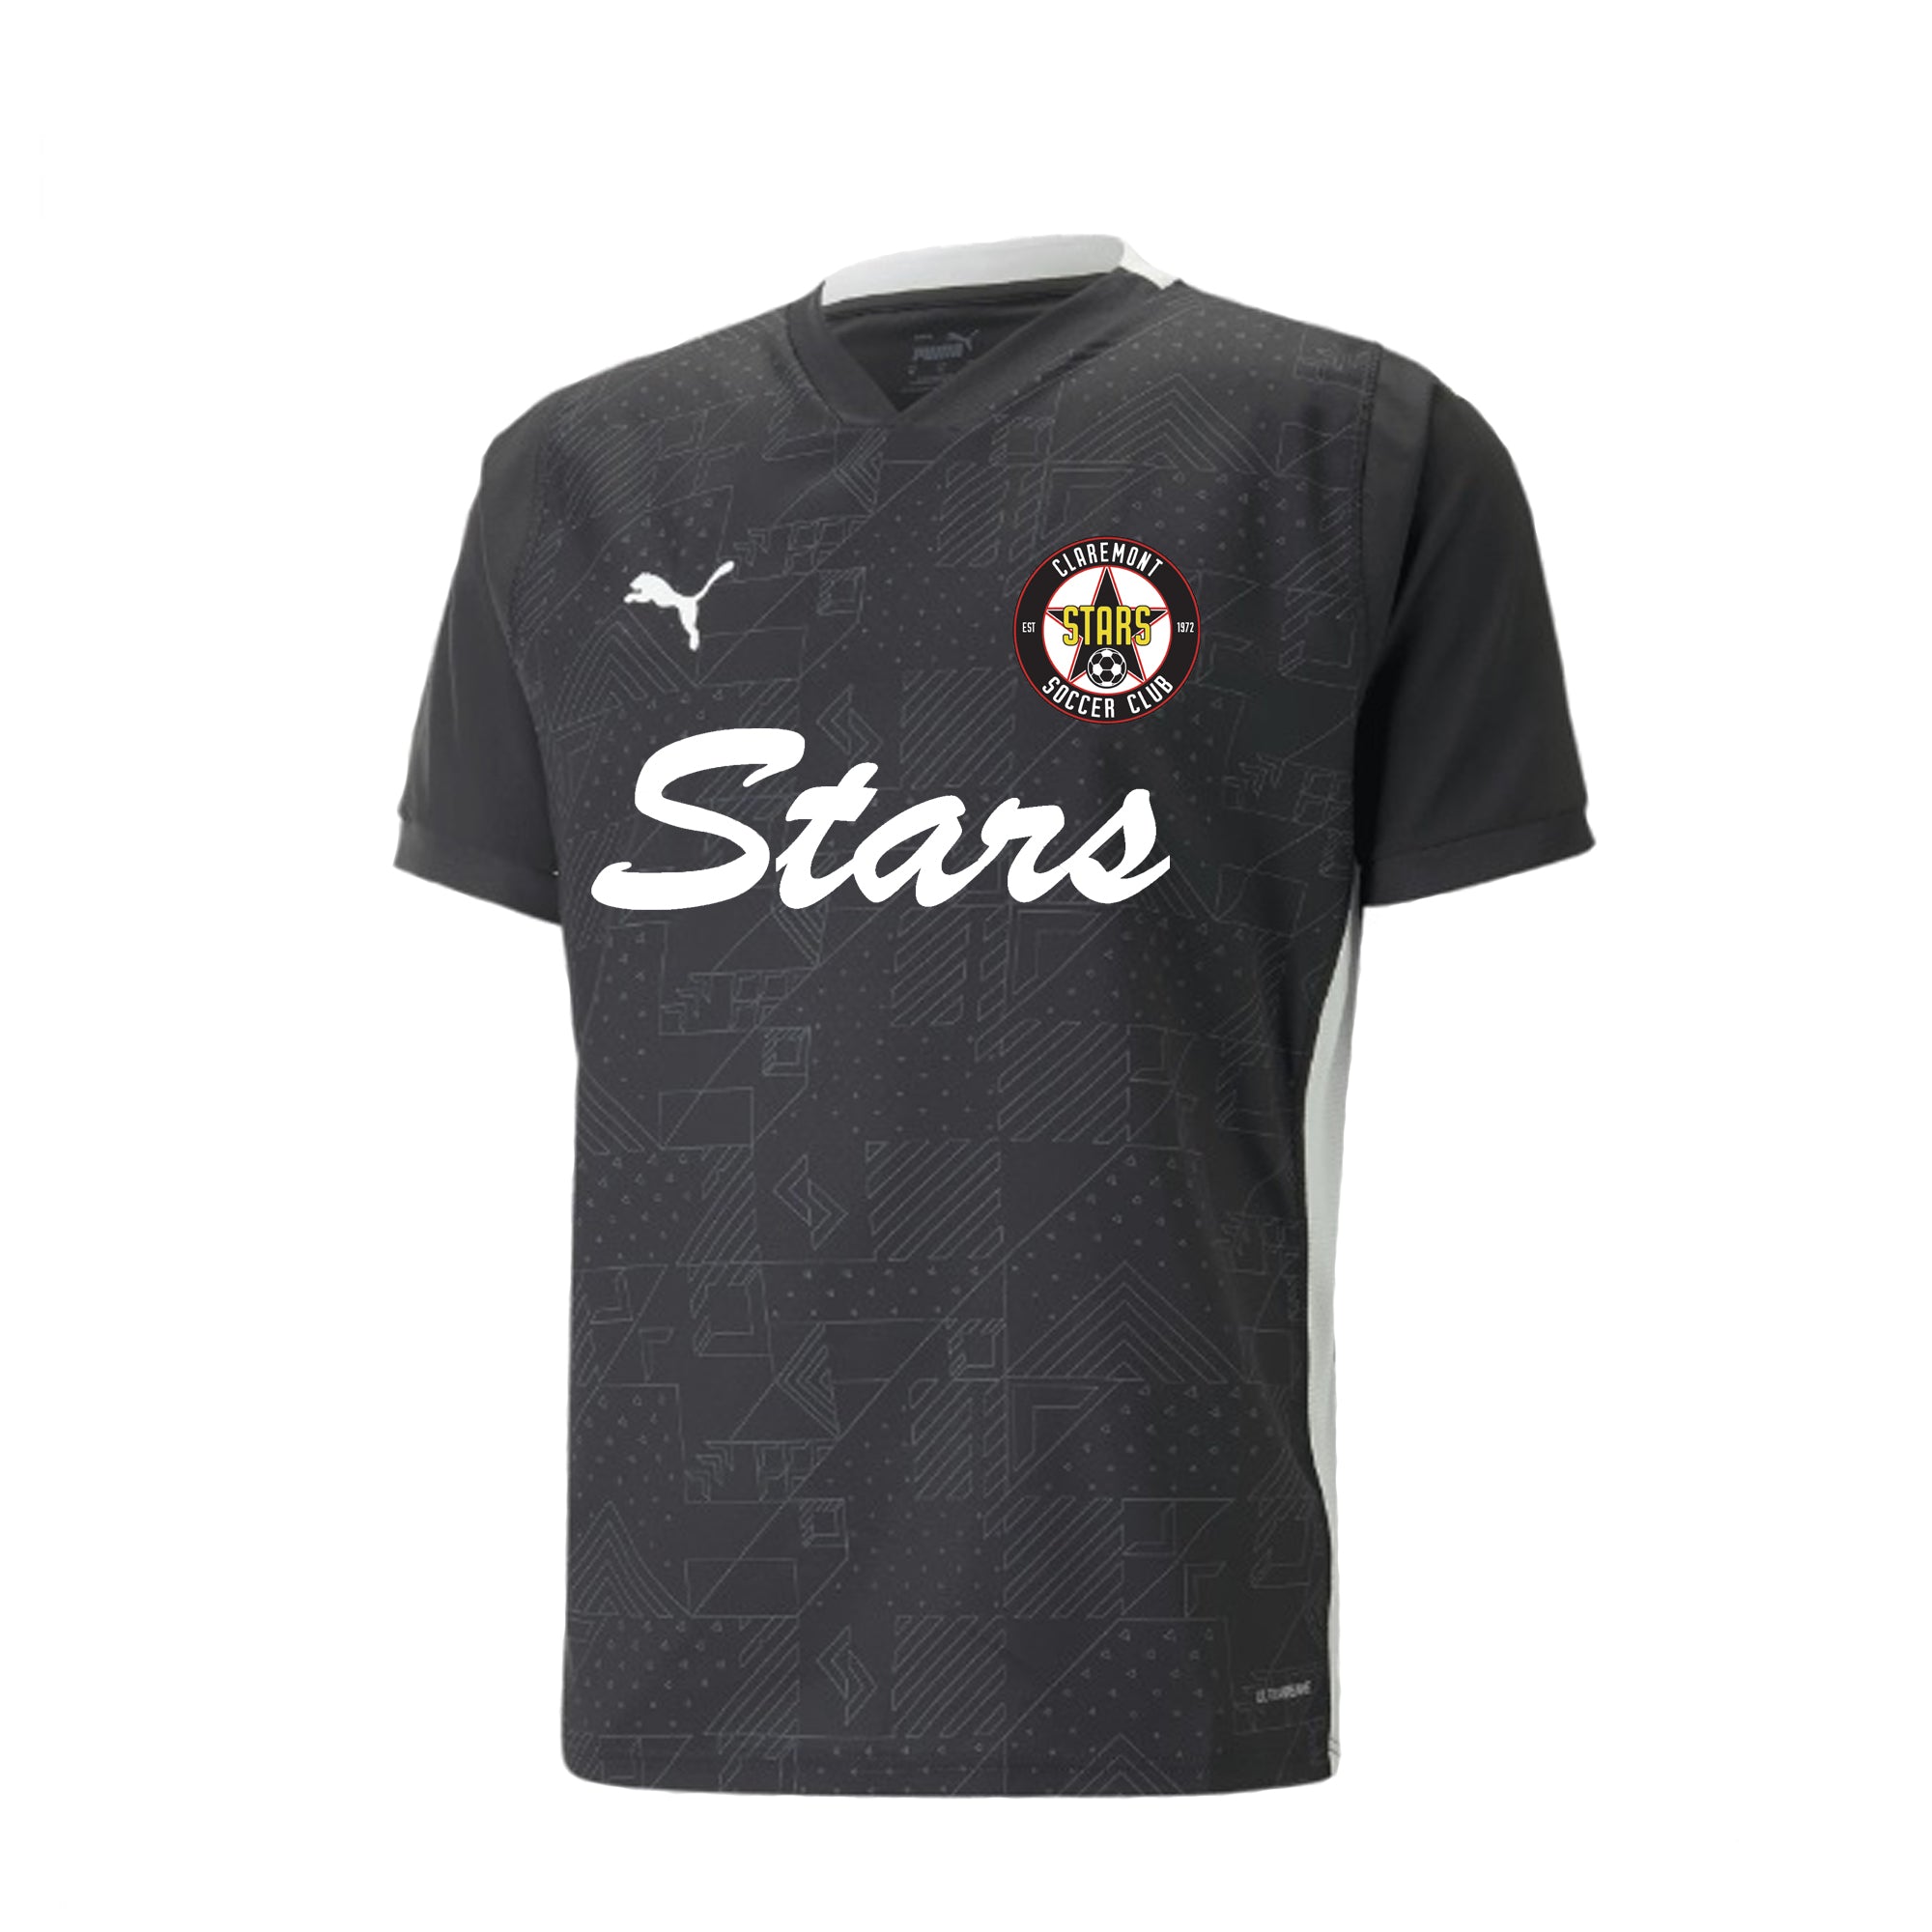 CLAREMONT STARS MEN AND YOUTH PUMA TEAM CUP JERSEY